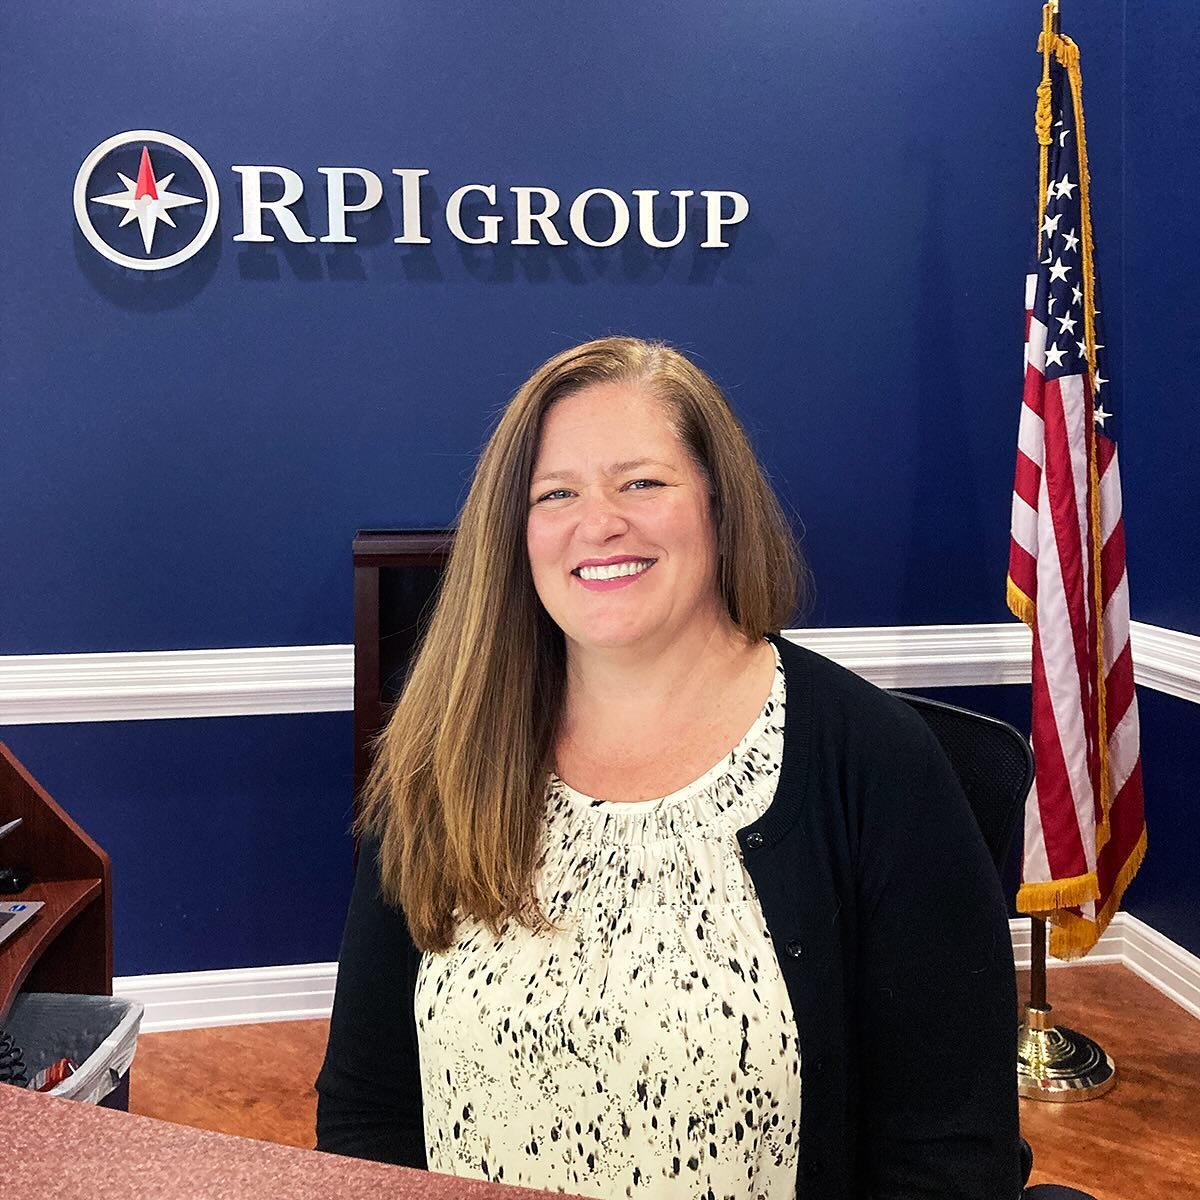 Happy Administrative Professionals Day! We want to give a shout out to our amazing Office Manager, Andy, who keeps our office running smoothly. If you&rsquo;ve ever been to our Fredericksburg office, she&rsquo;s the first smiling face you see when yo